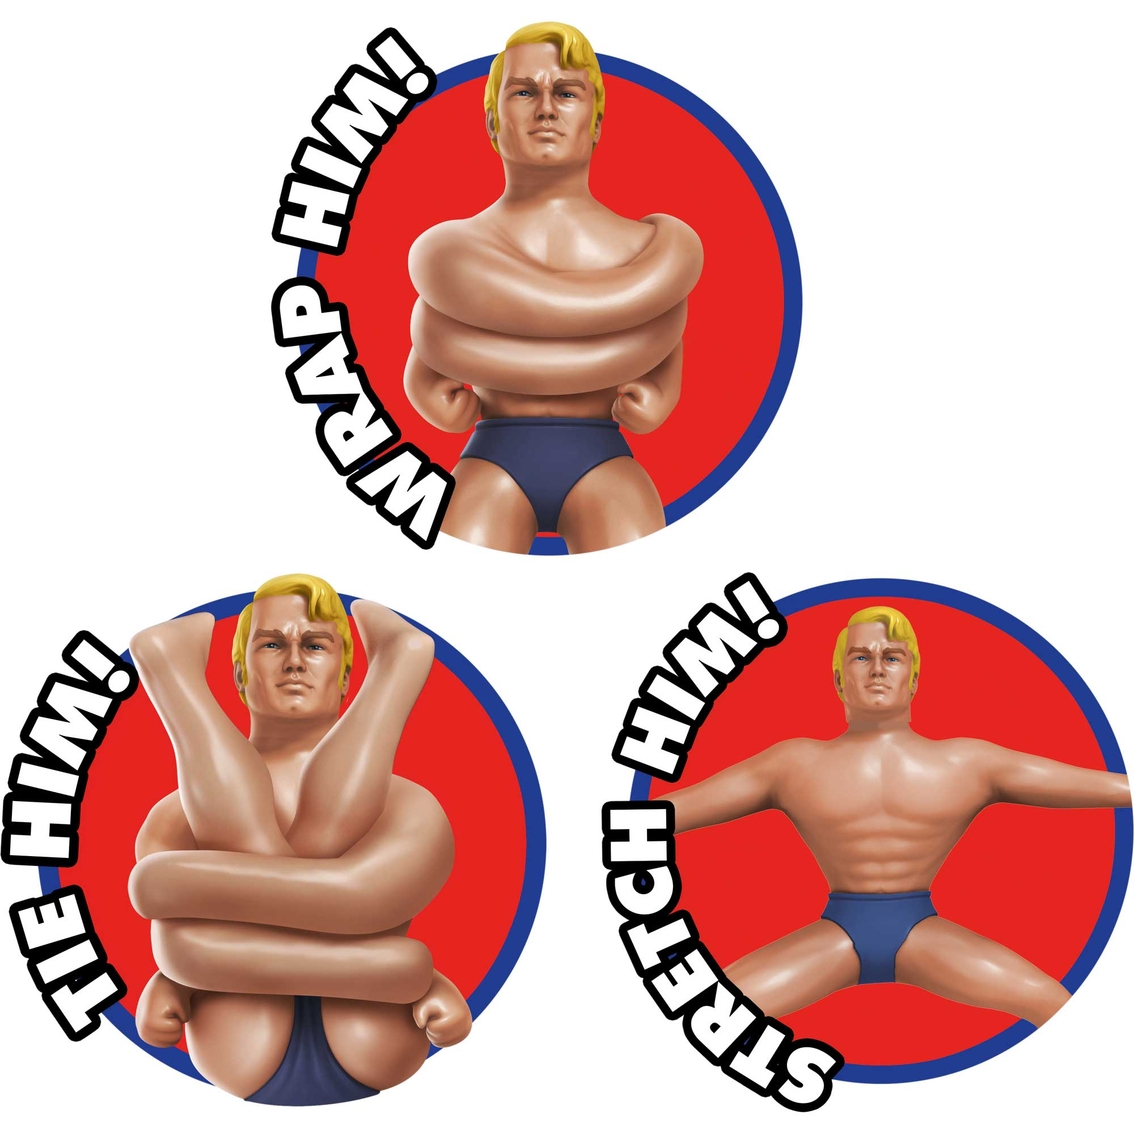 The Original Stretch Armstrong Action Figure - Image 4 of 4